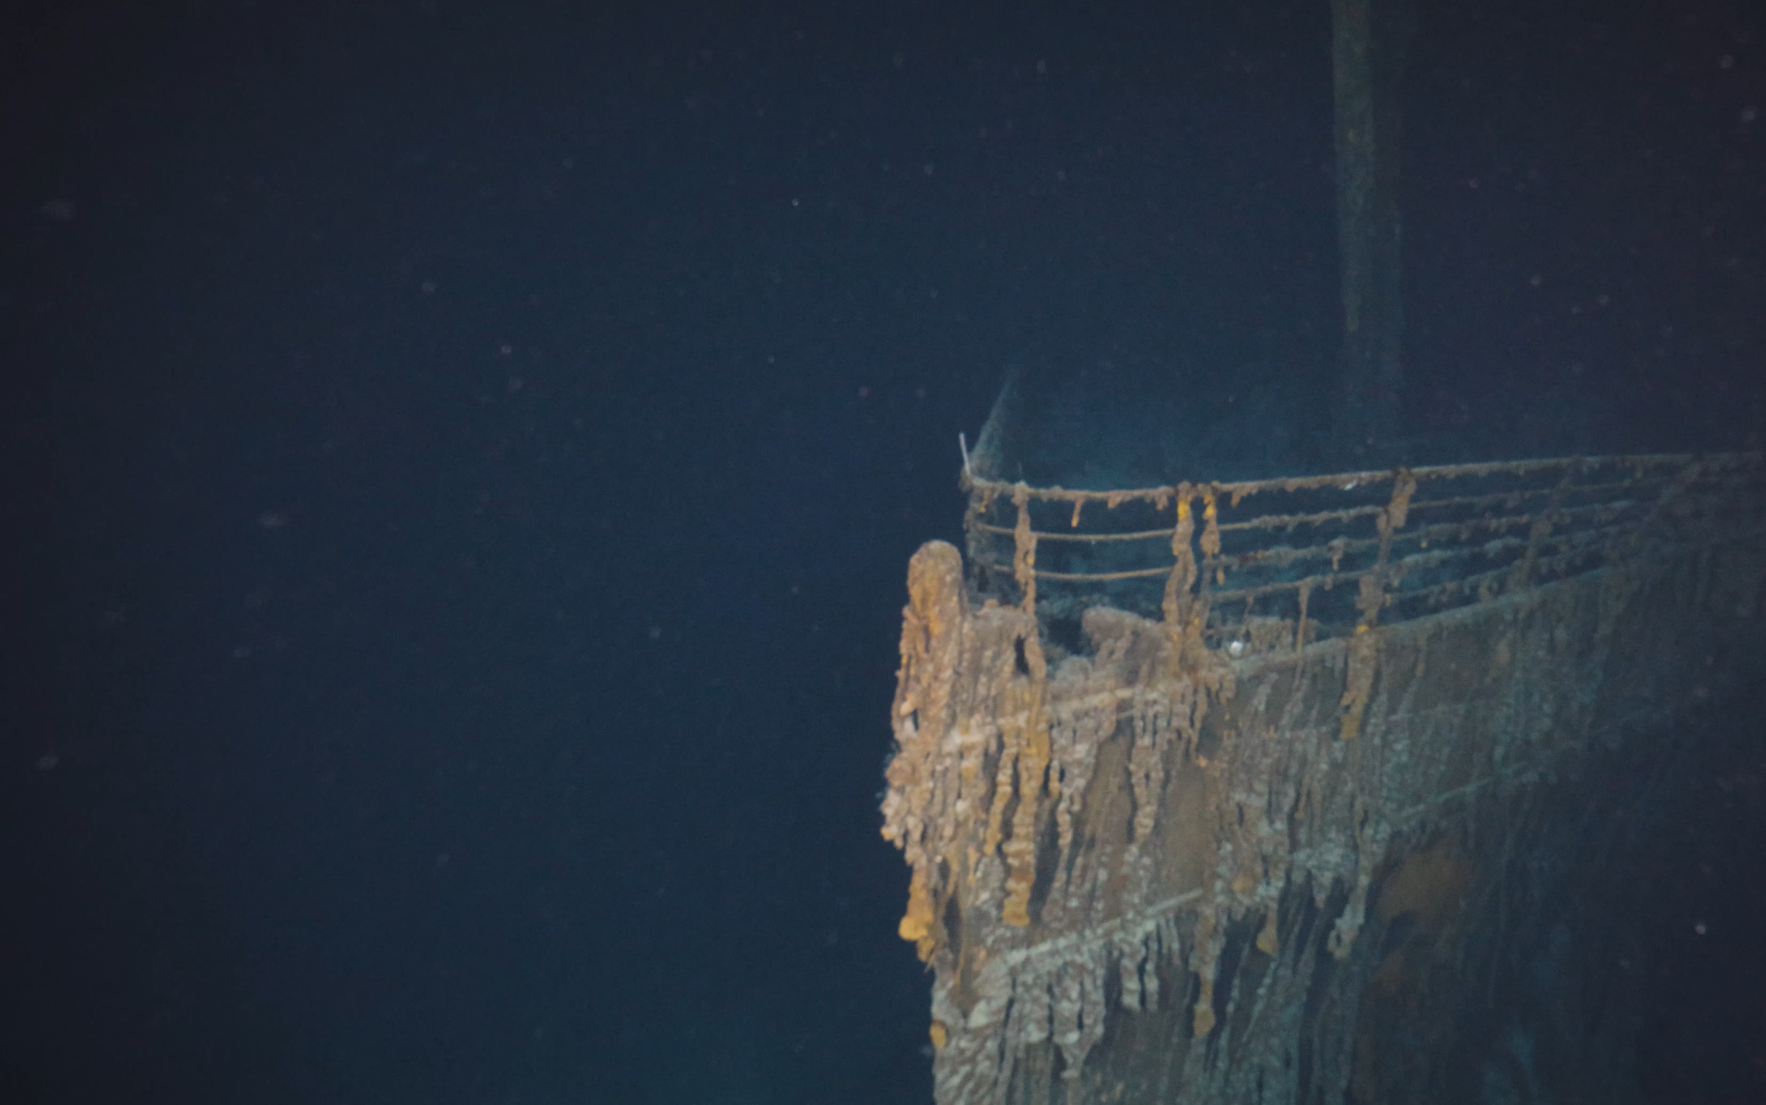 High quality film shows detail on Titanic shipwreck for 1st time | The  Times of Israel